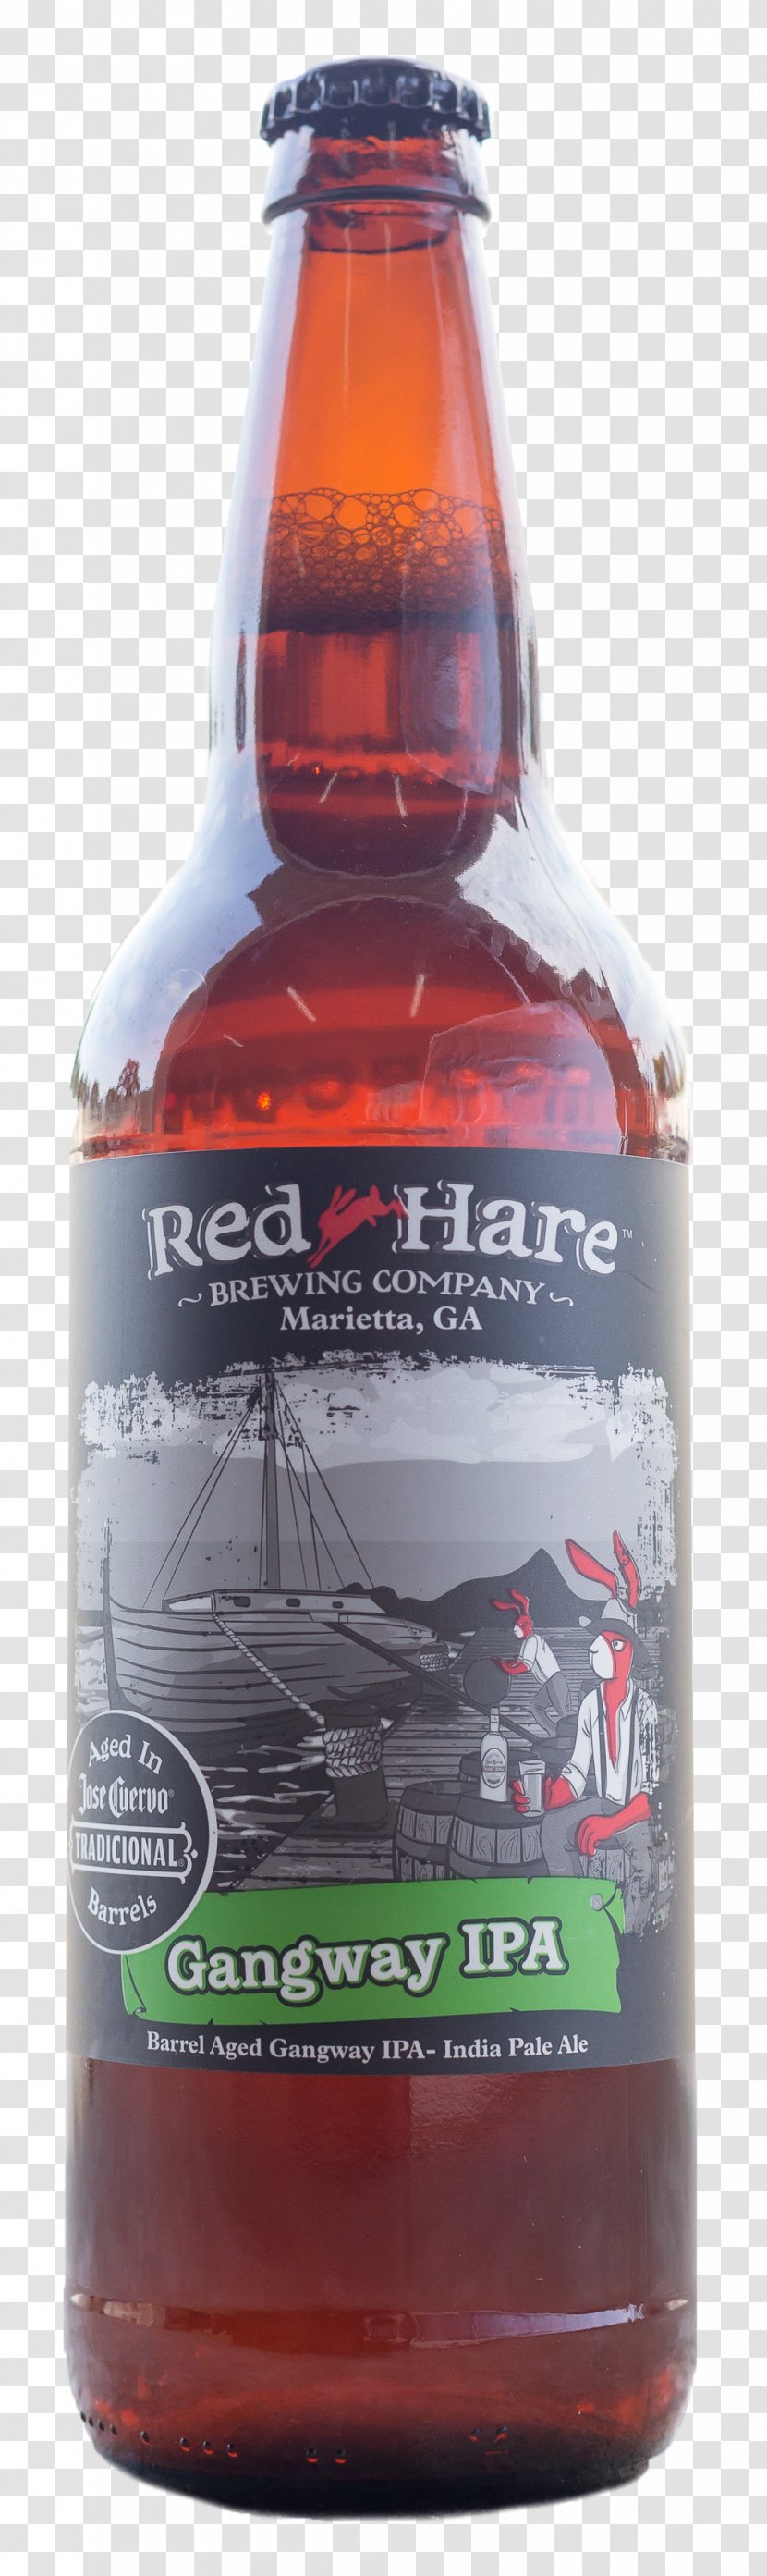 India Pale Ale Red Hare Brewing Company Glass Bottle Beer Transparent PNG